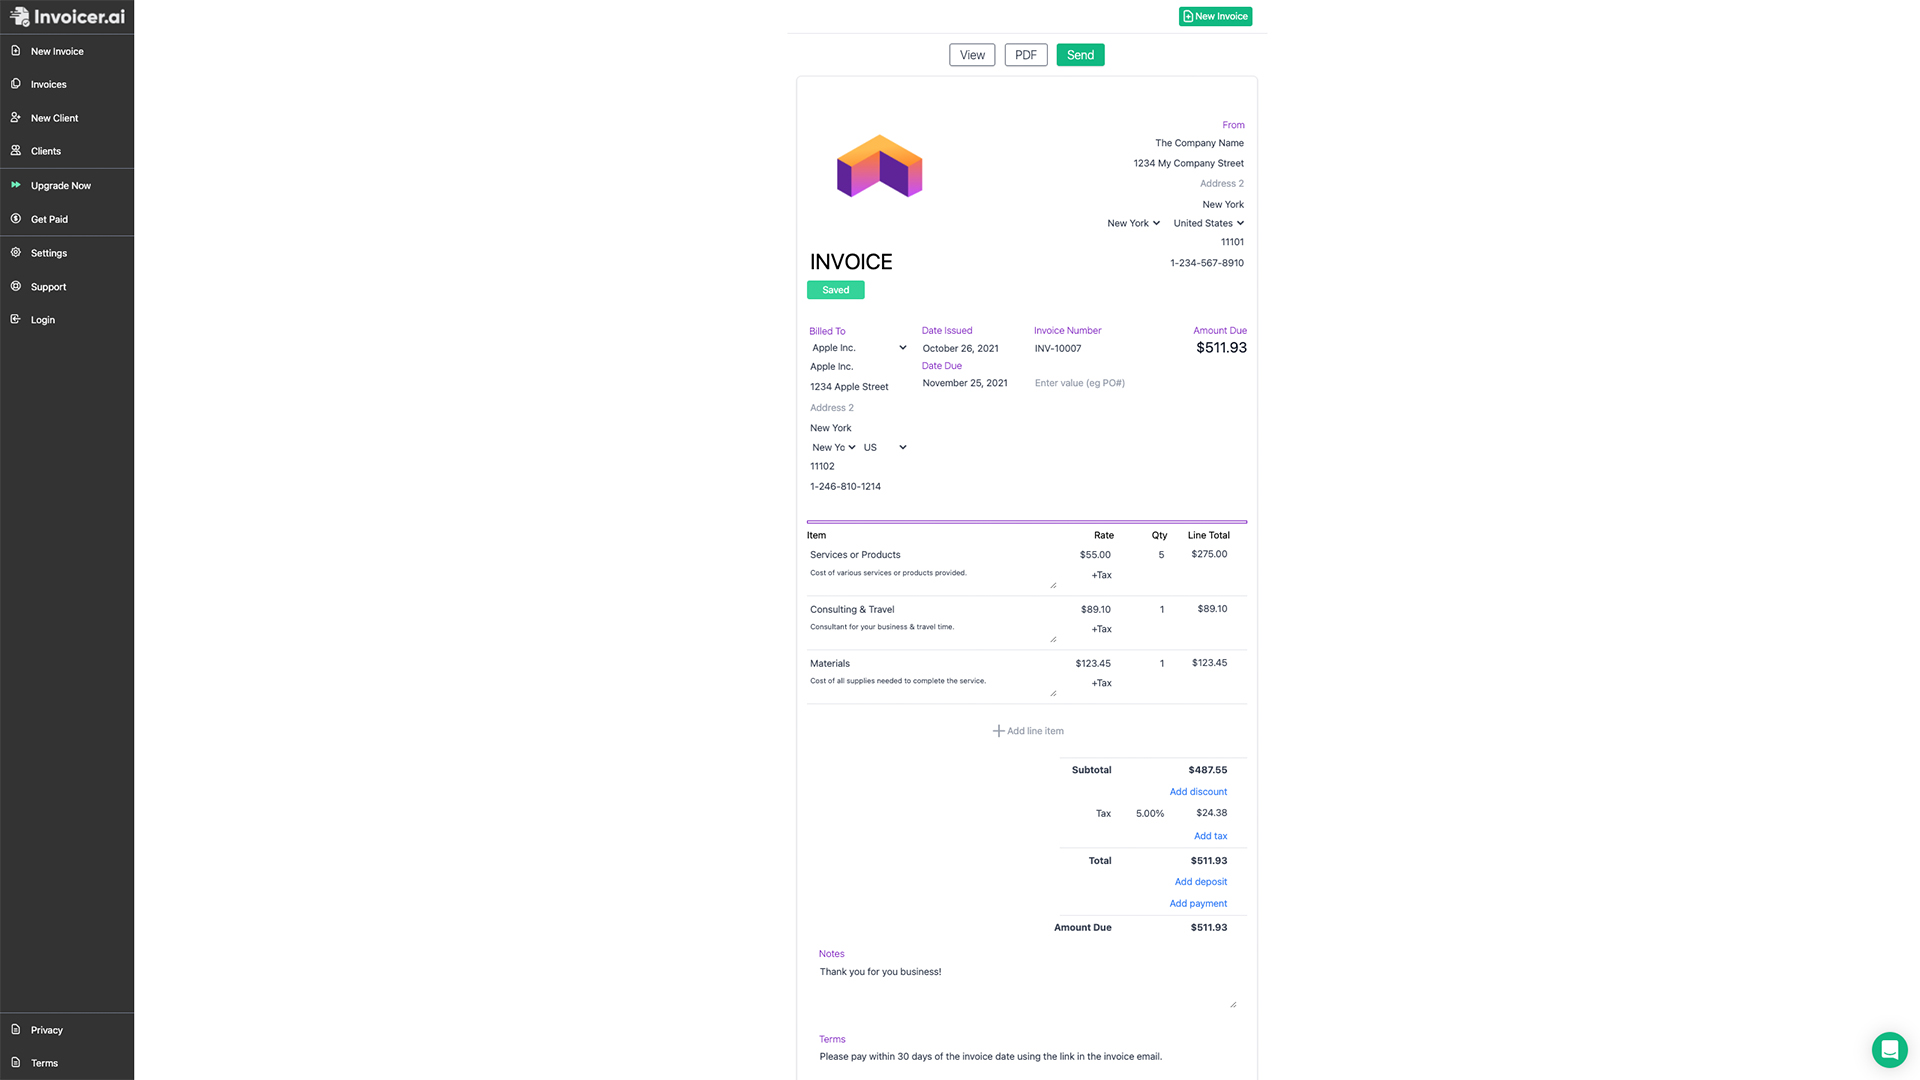 Our intuitive inline editor is simple and allows you to craft stunning invoices in seconds.